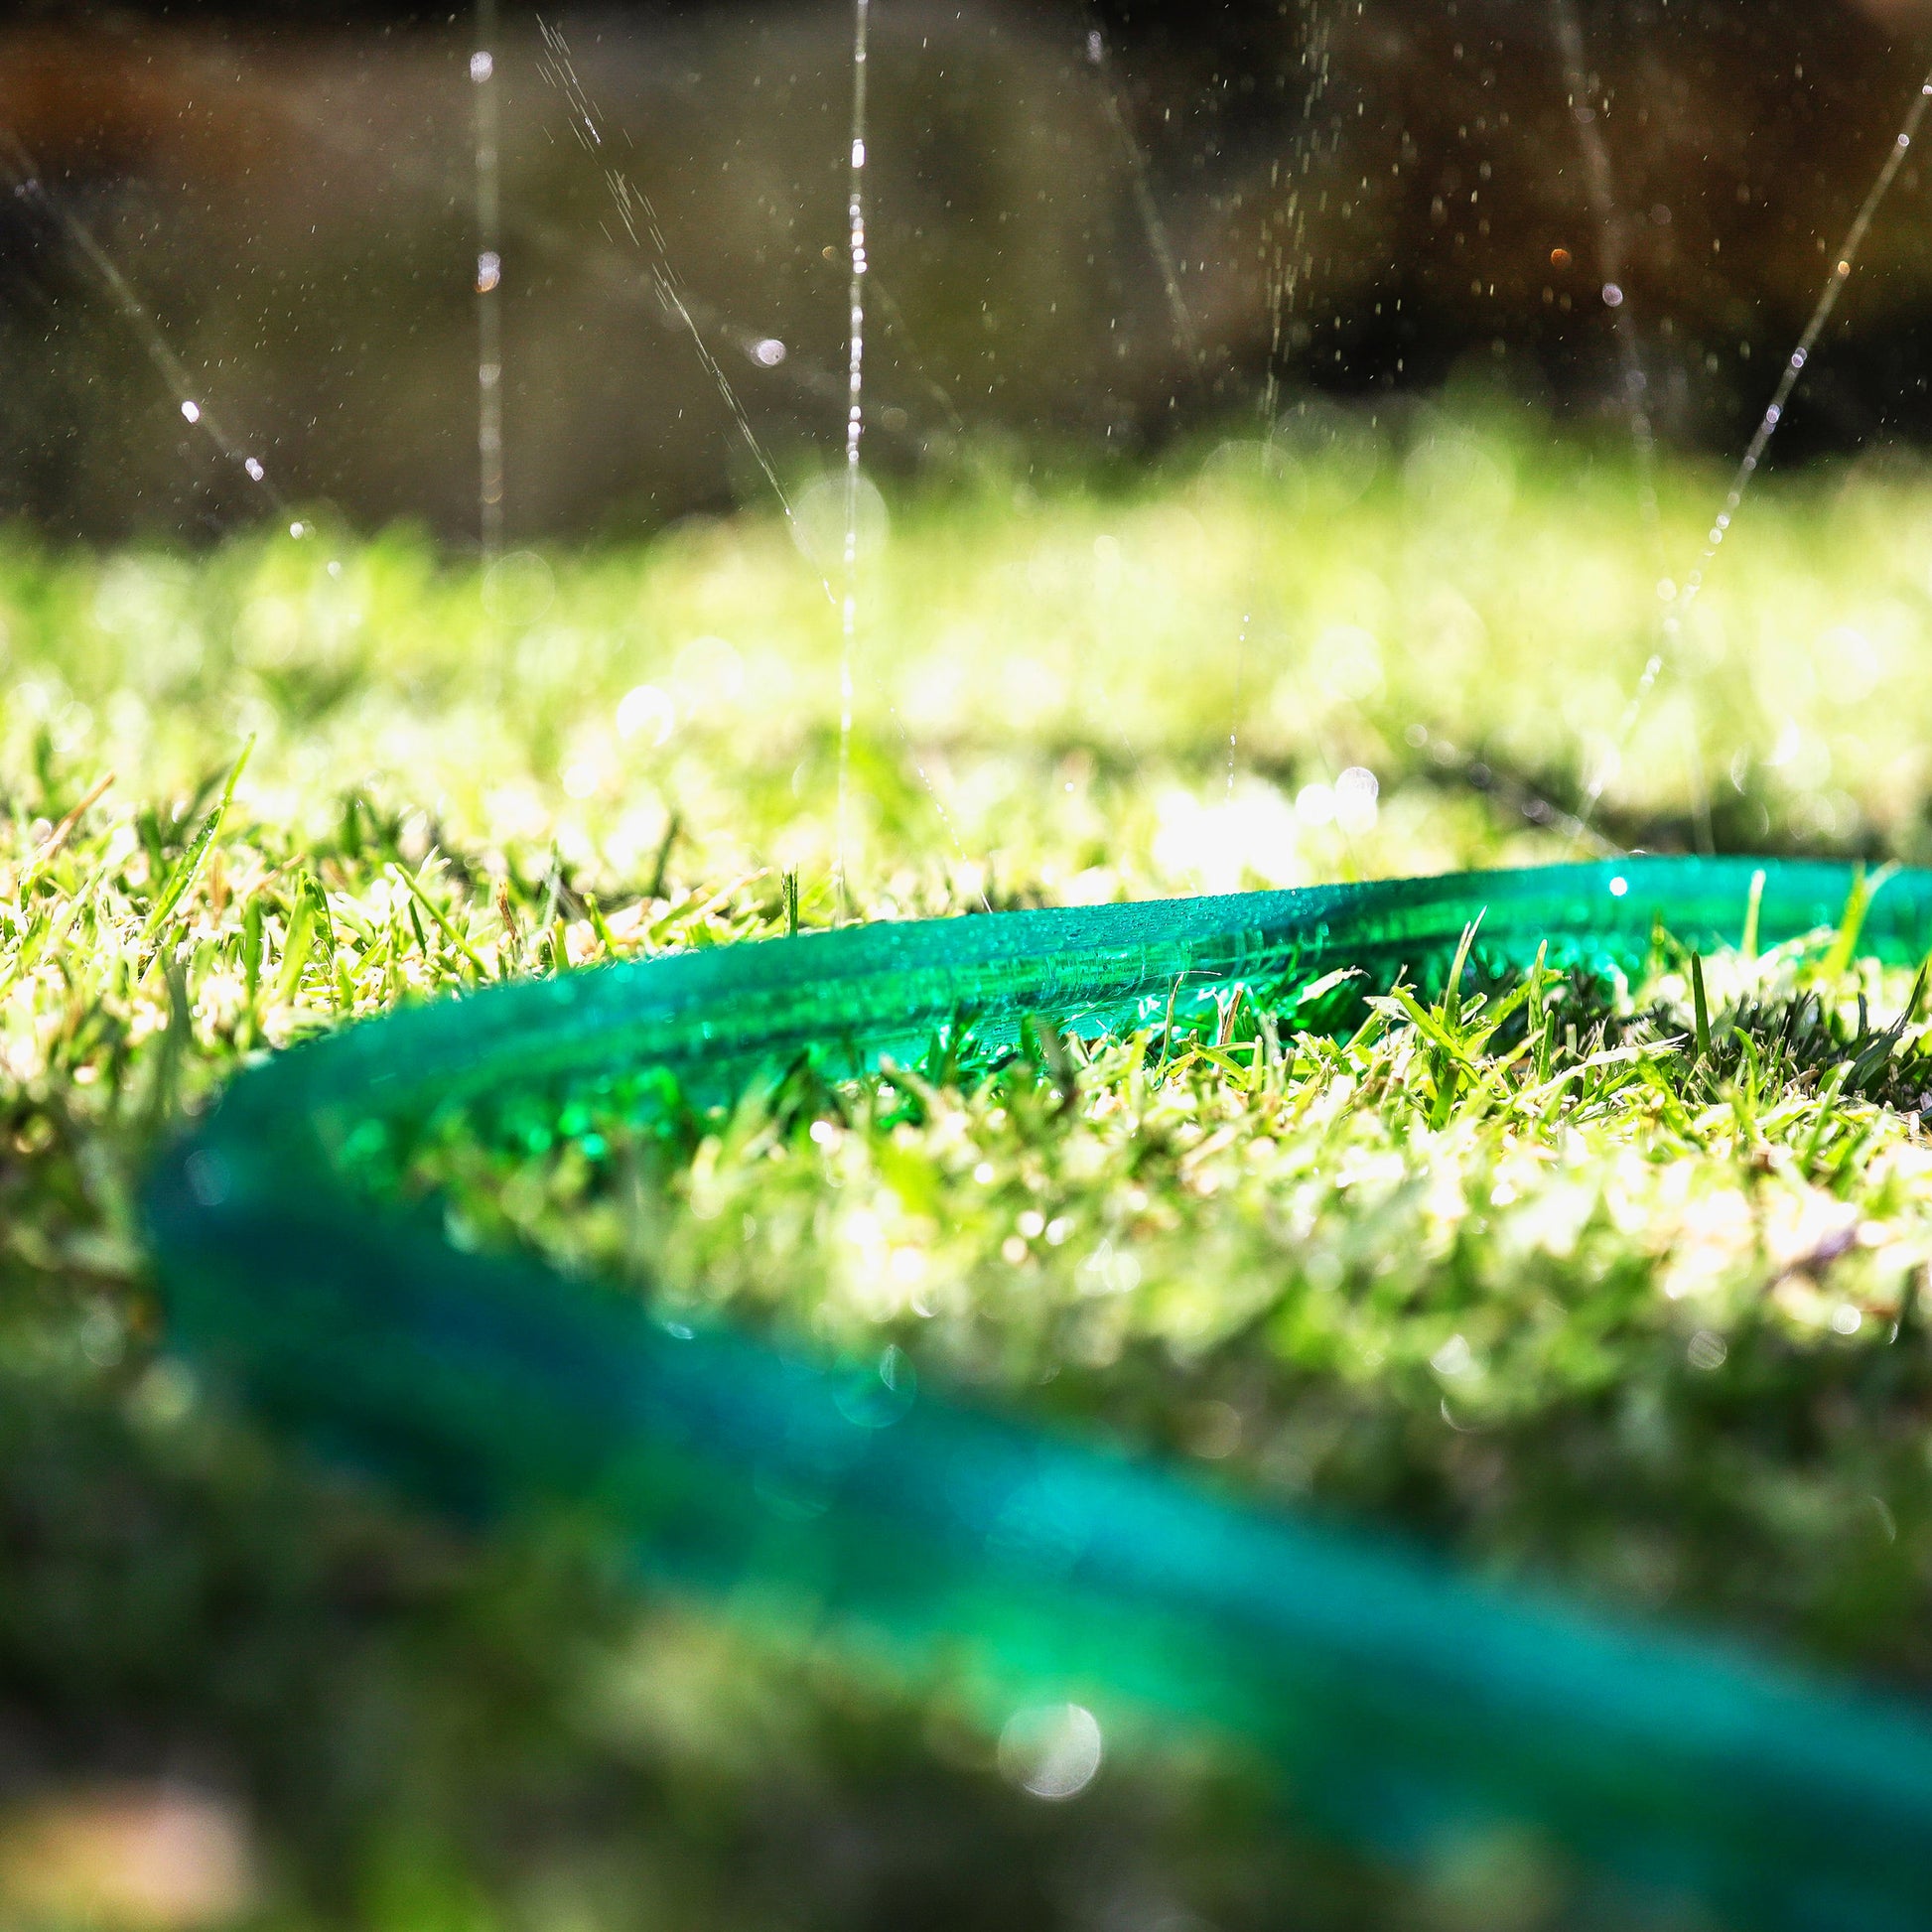 close up of green soaker hose on lawn spraying water upwards